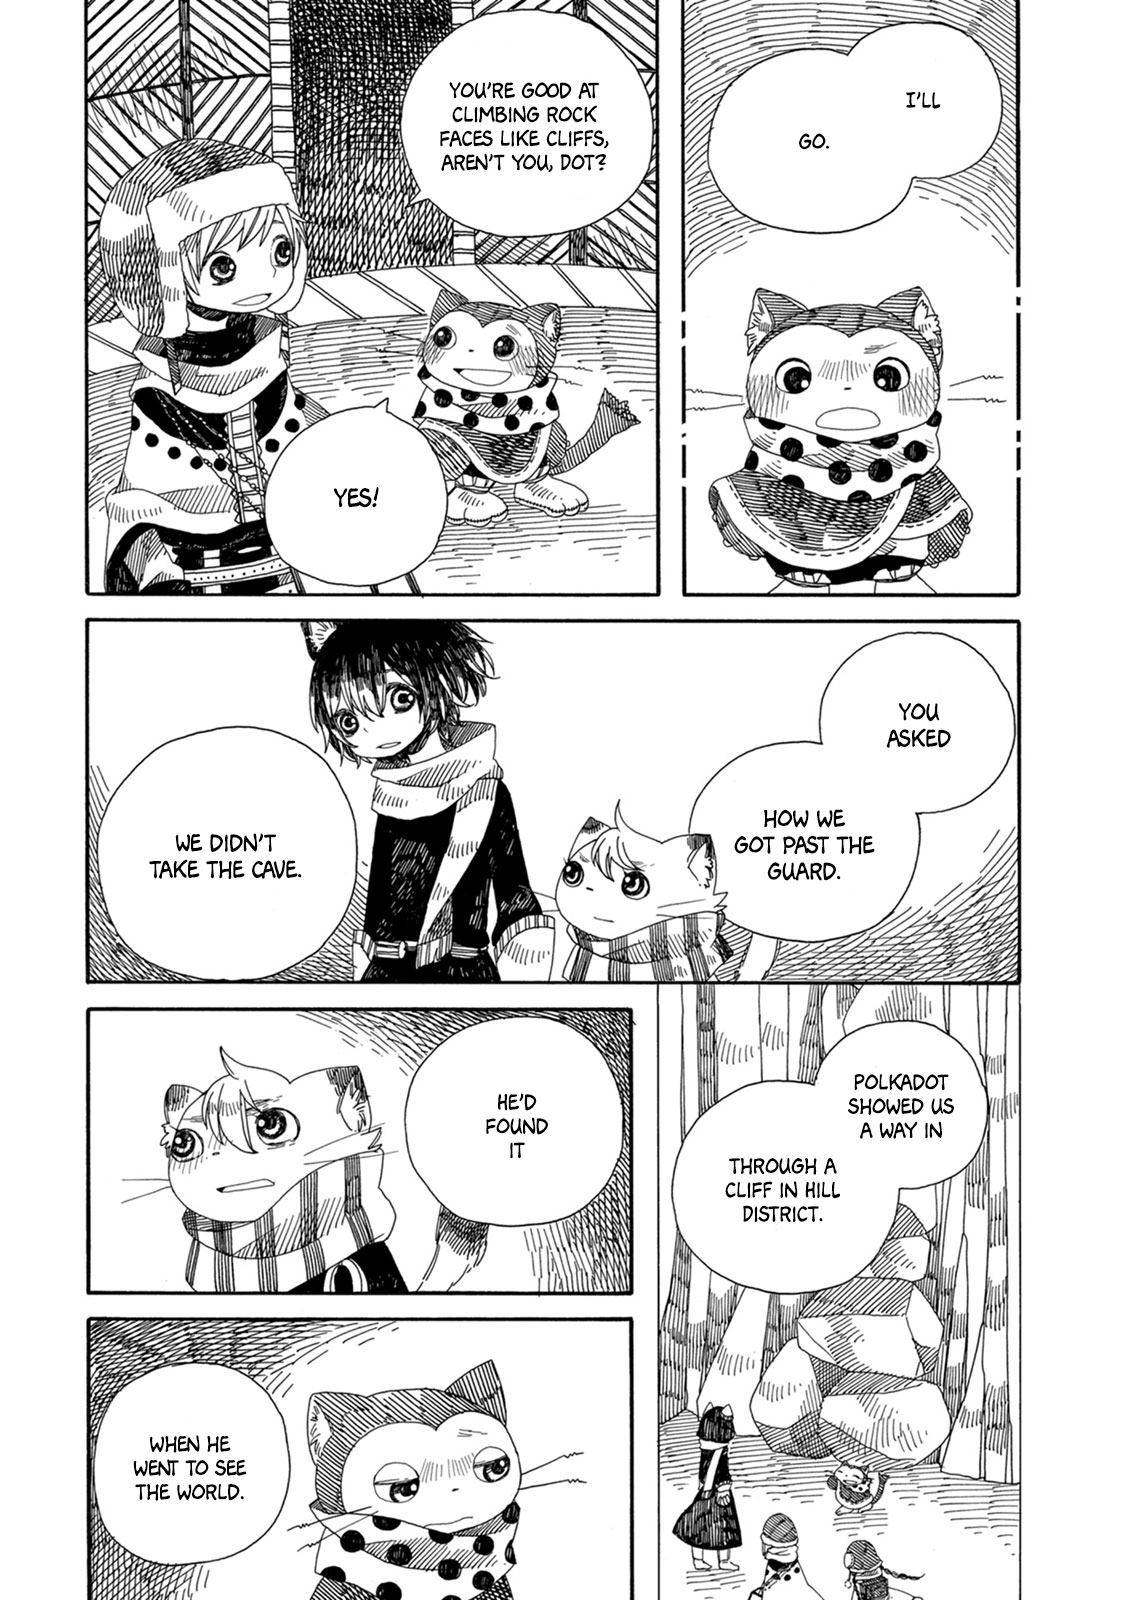 Ame to Hare no Kaze no Tabi Vol. 2 Ch. 12 Snowy Mountains of the Furries (Part 1)